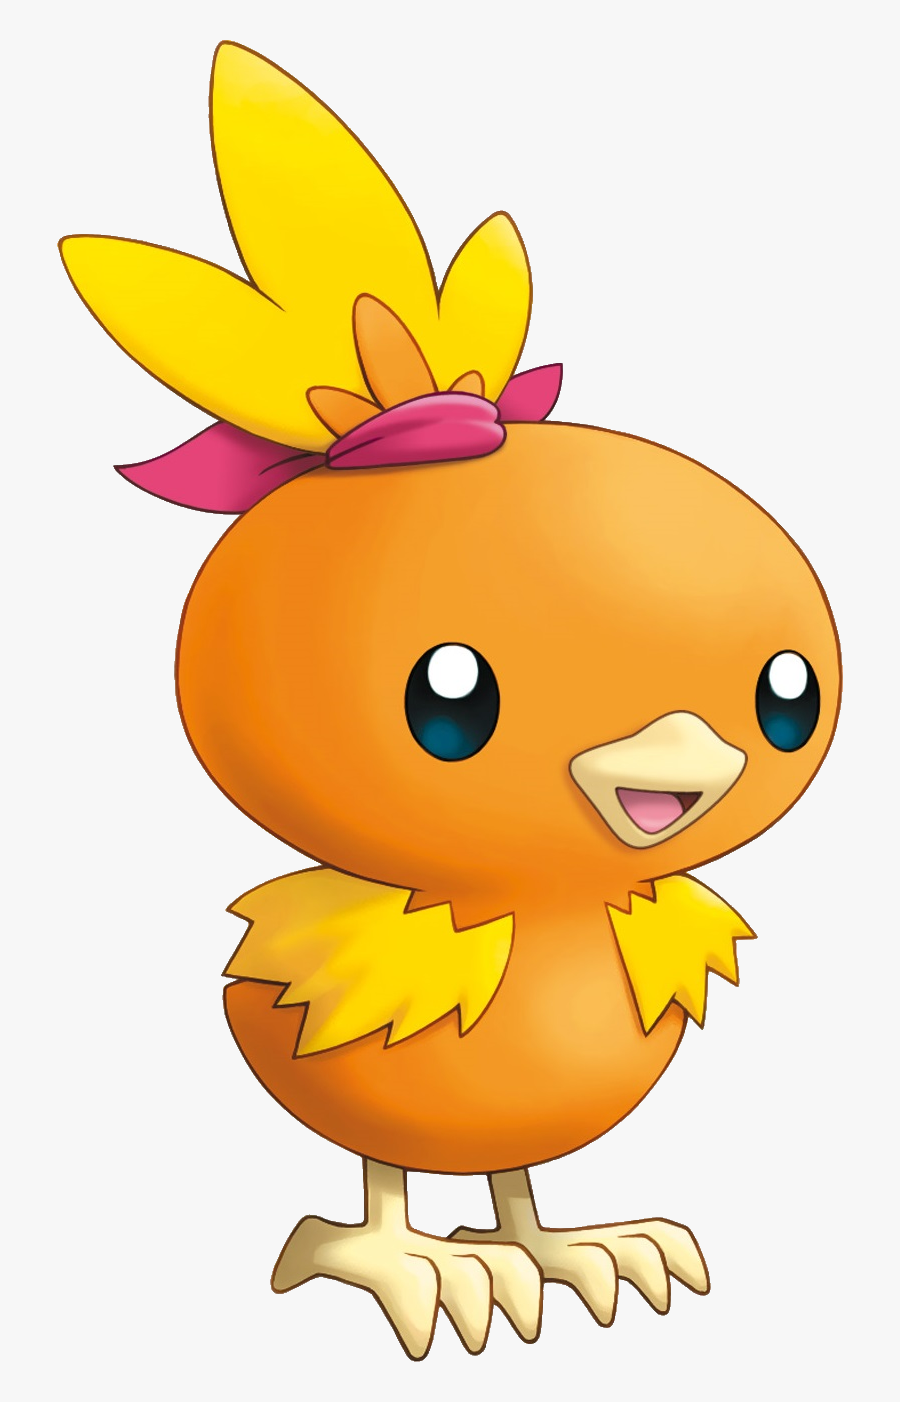 255torchic Pokemon Mystery Dungeon Explorers Of Sky - Pokemon Mystery Dungeon Explorers Of Sky Torchic, Transparent Clipart